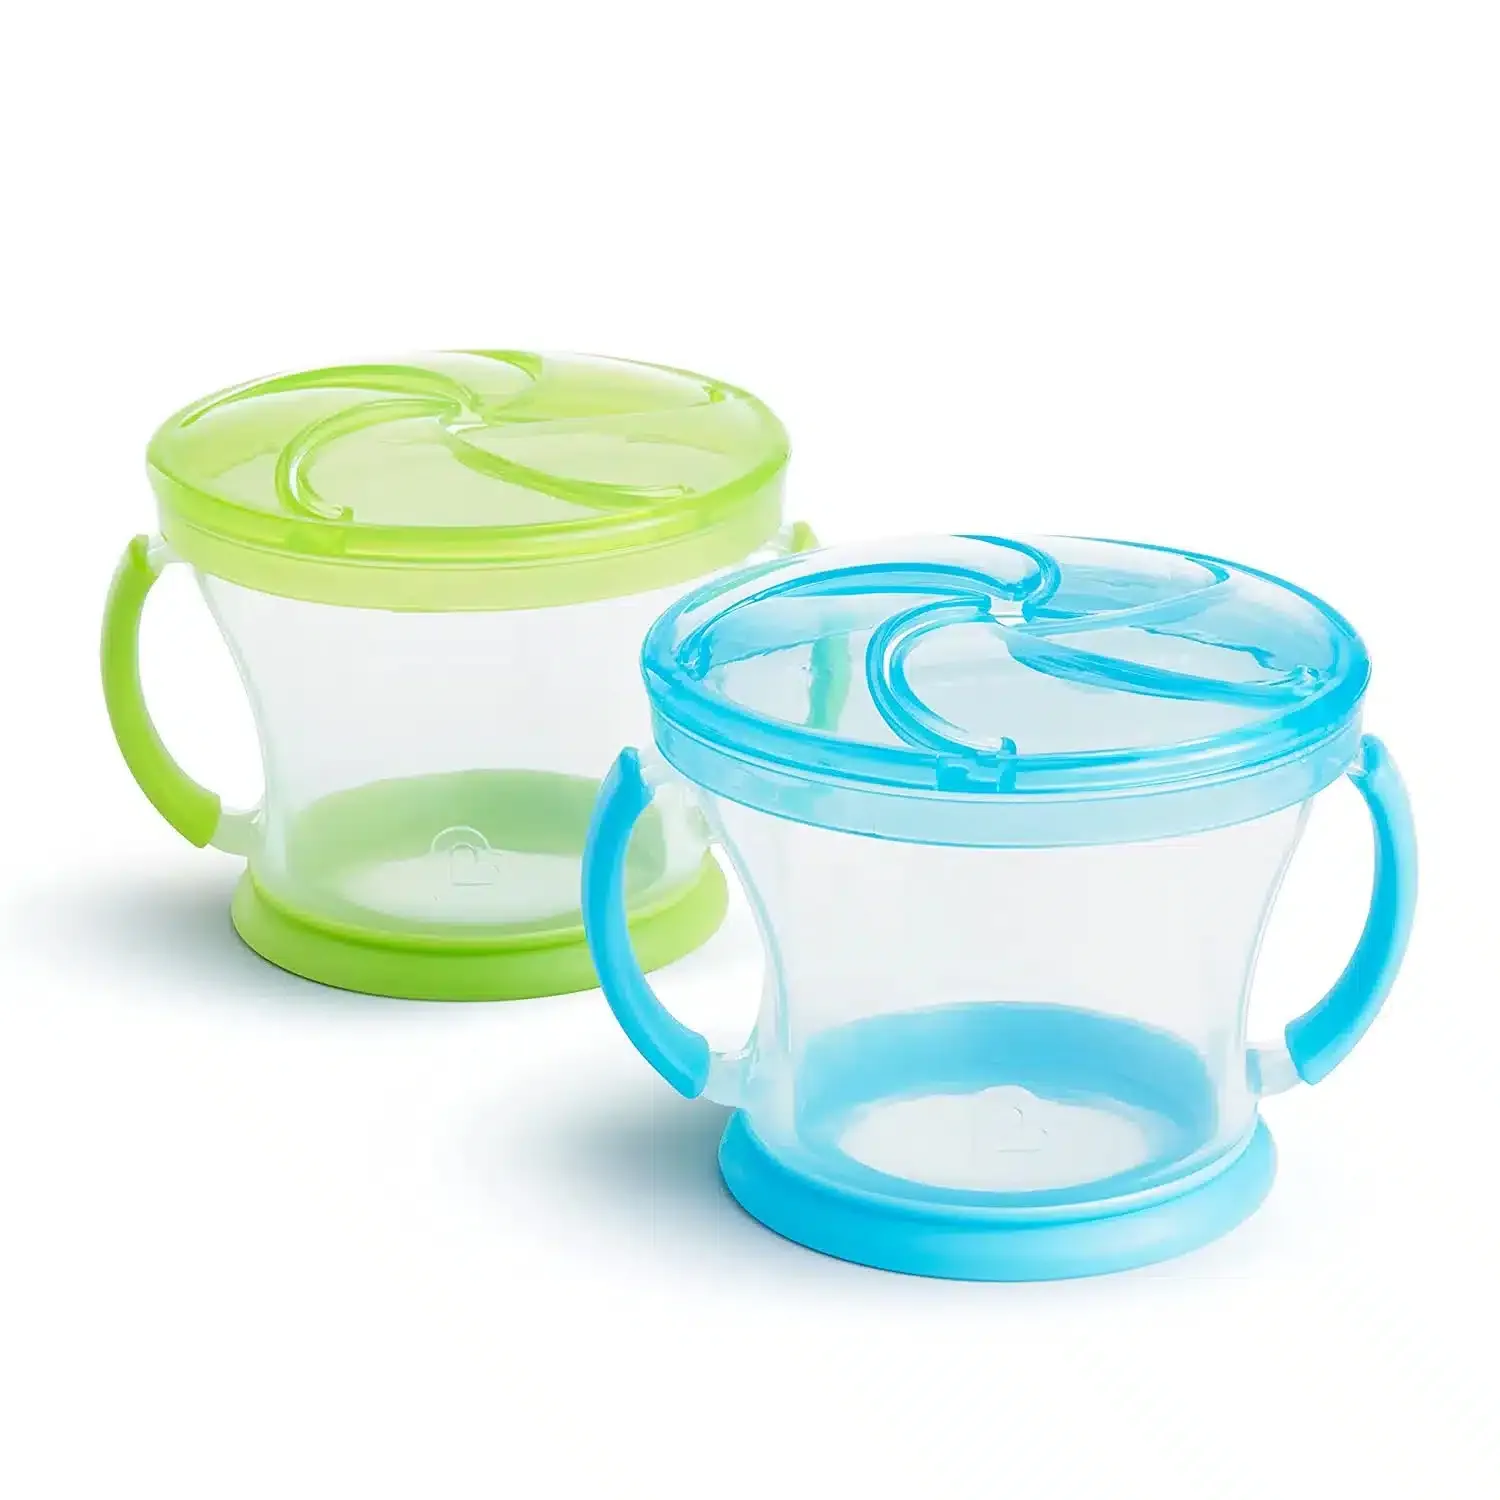 Munchkin Snack Cups - Toddler Packing Guide